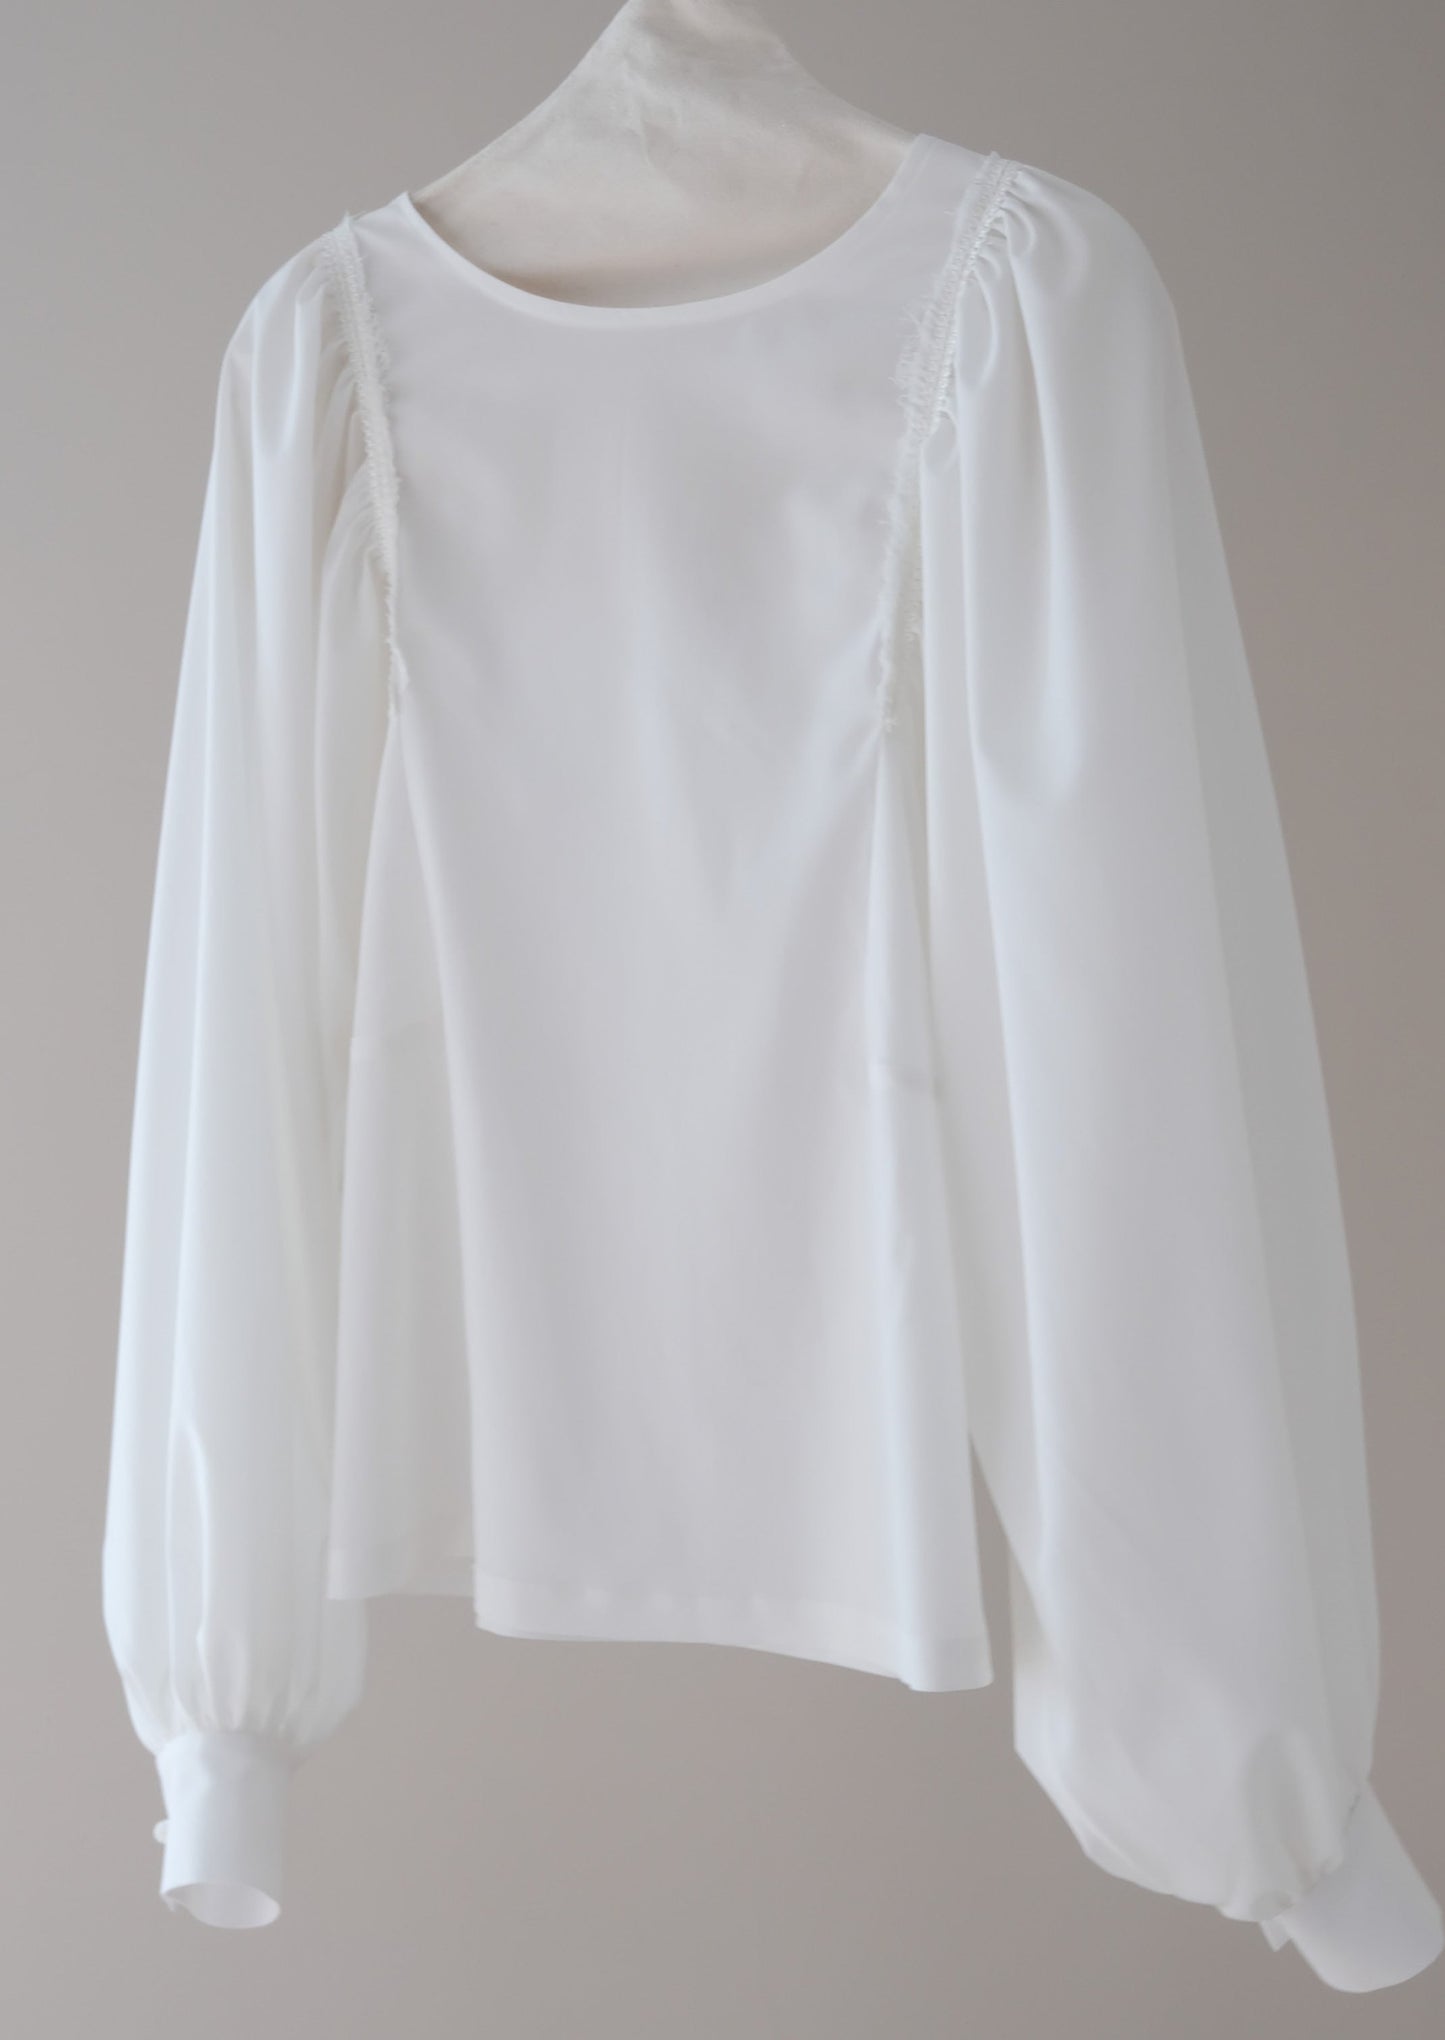 puffy long-sleeves shirt (in-stock)